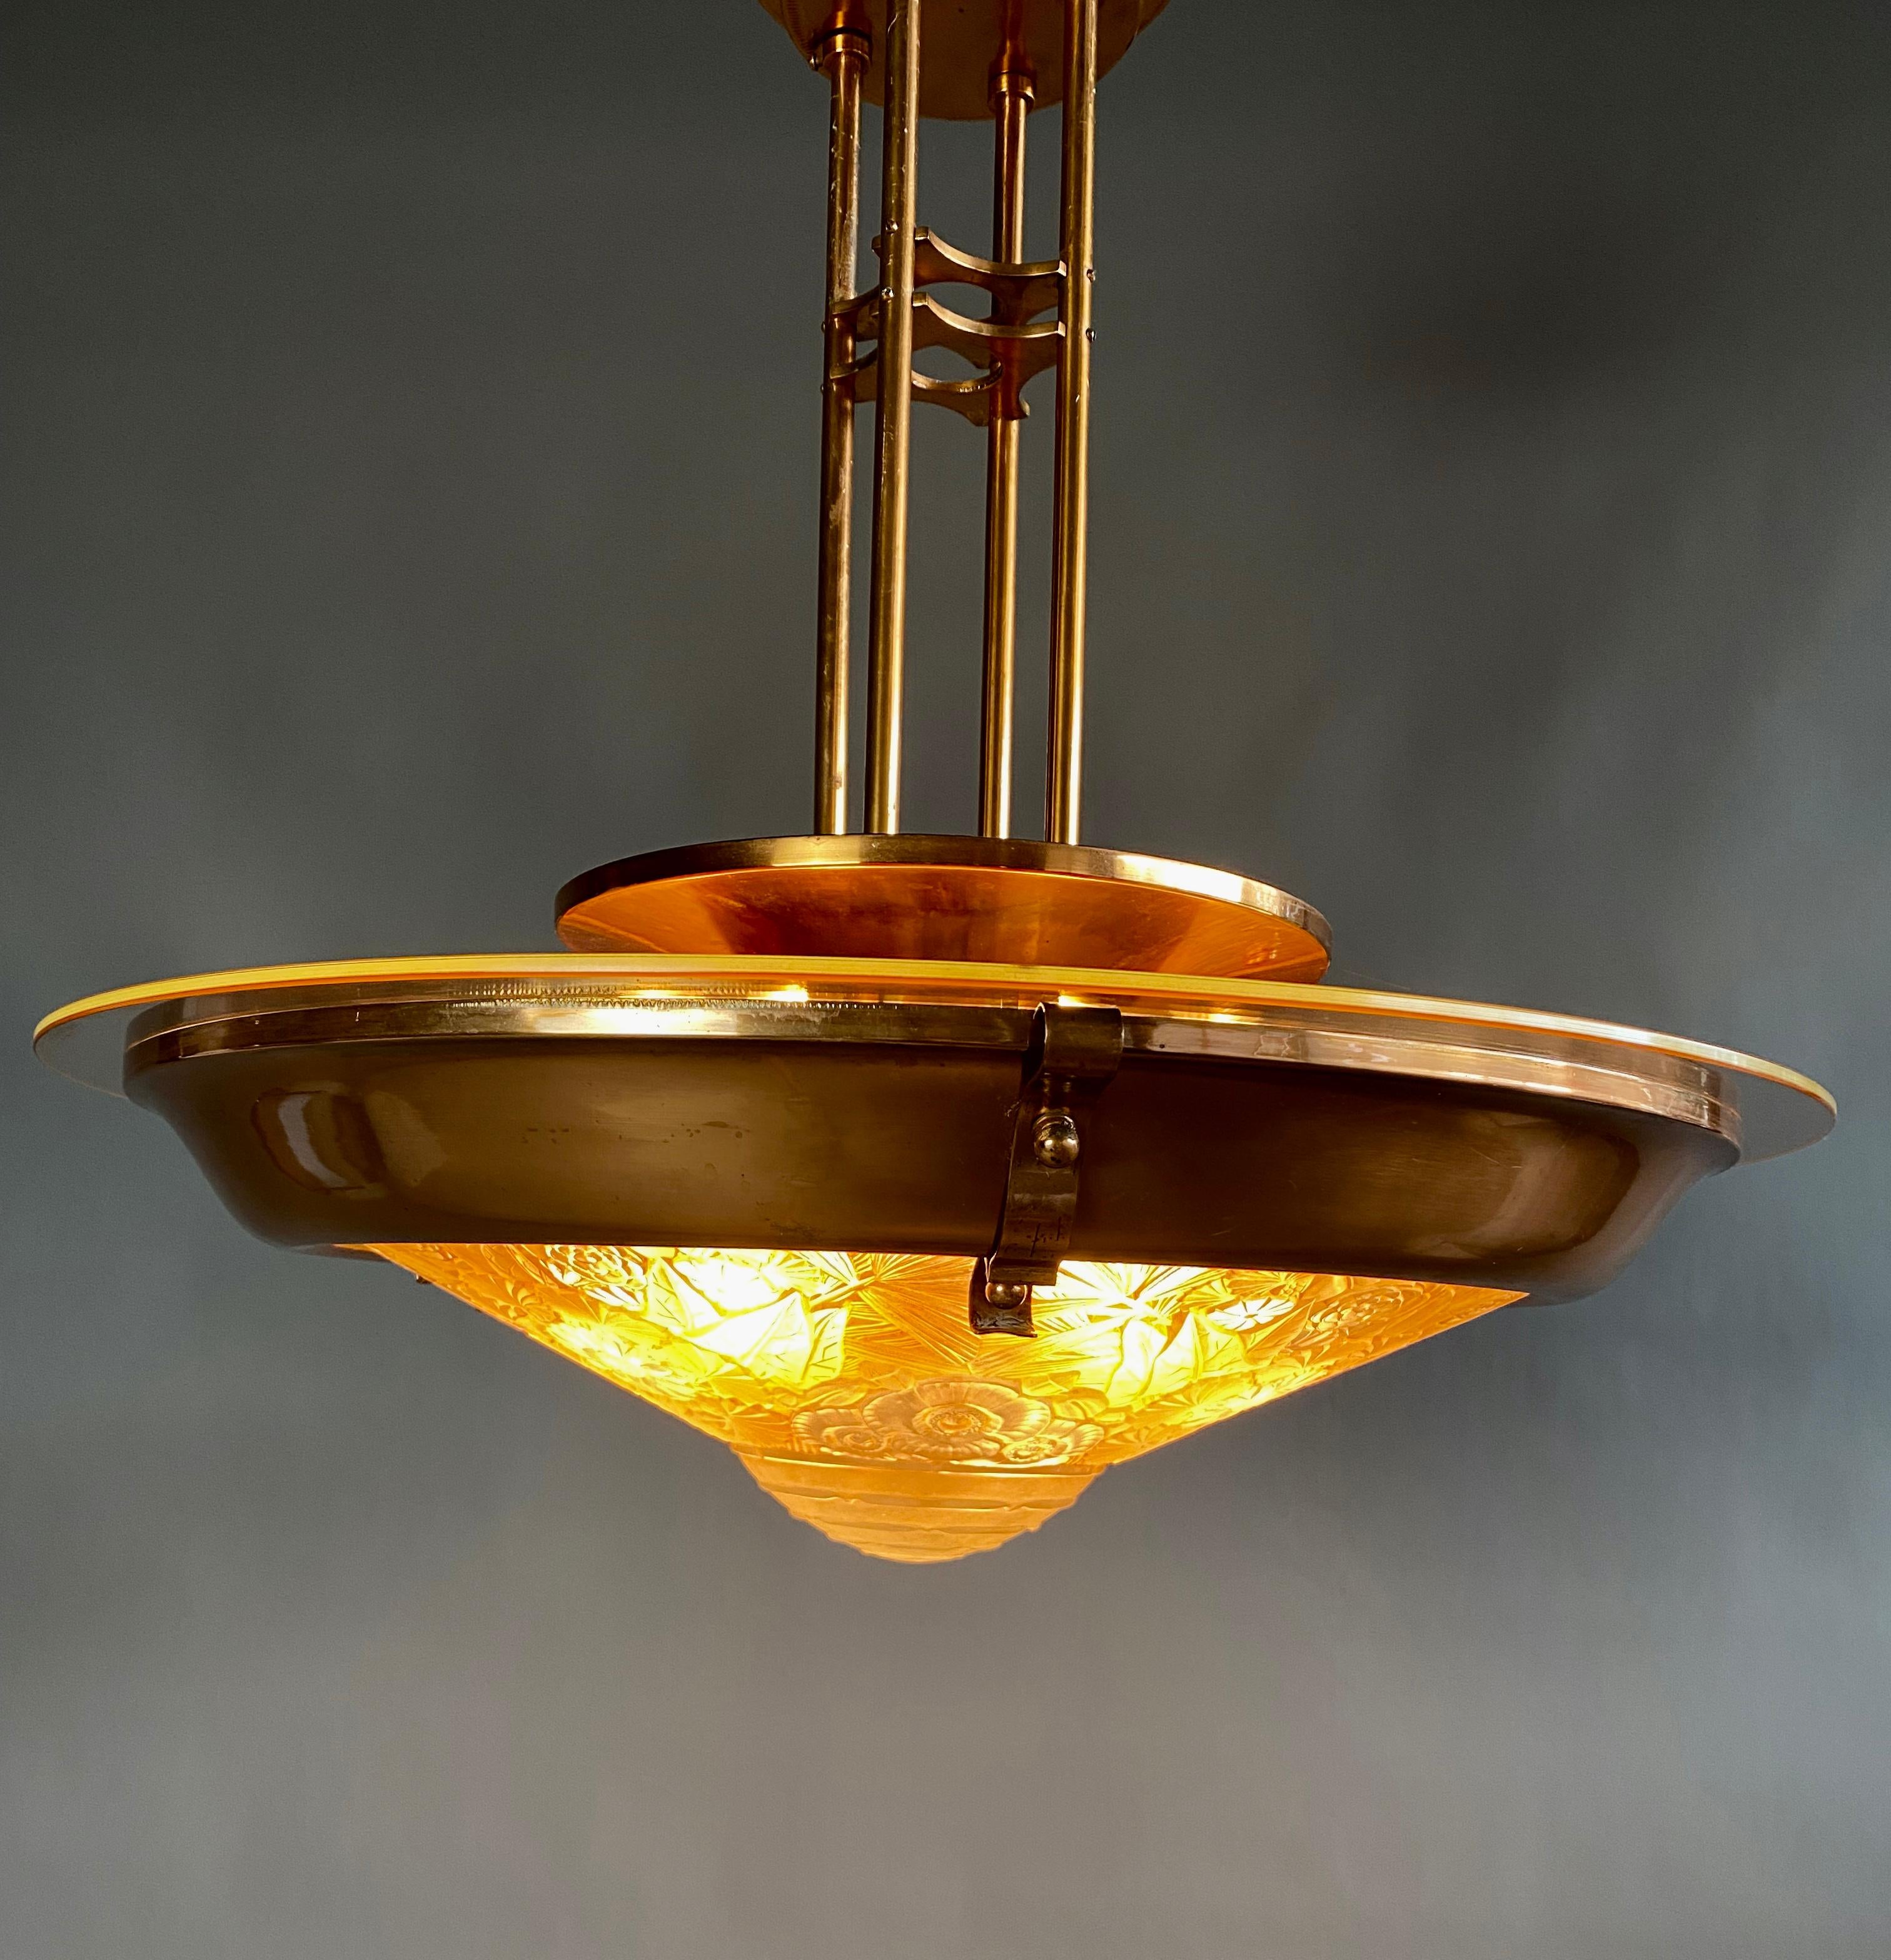 Stylish and classy French Art Nouveau / Art Deco brass and acid etched glass chandelier in the style of Lalique.
The upper brass part rests on top of the glass. It is not fixed but that is how I bought the chandelier.

The chandelier will be shipped